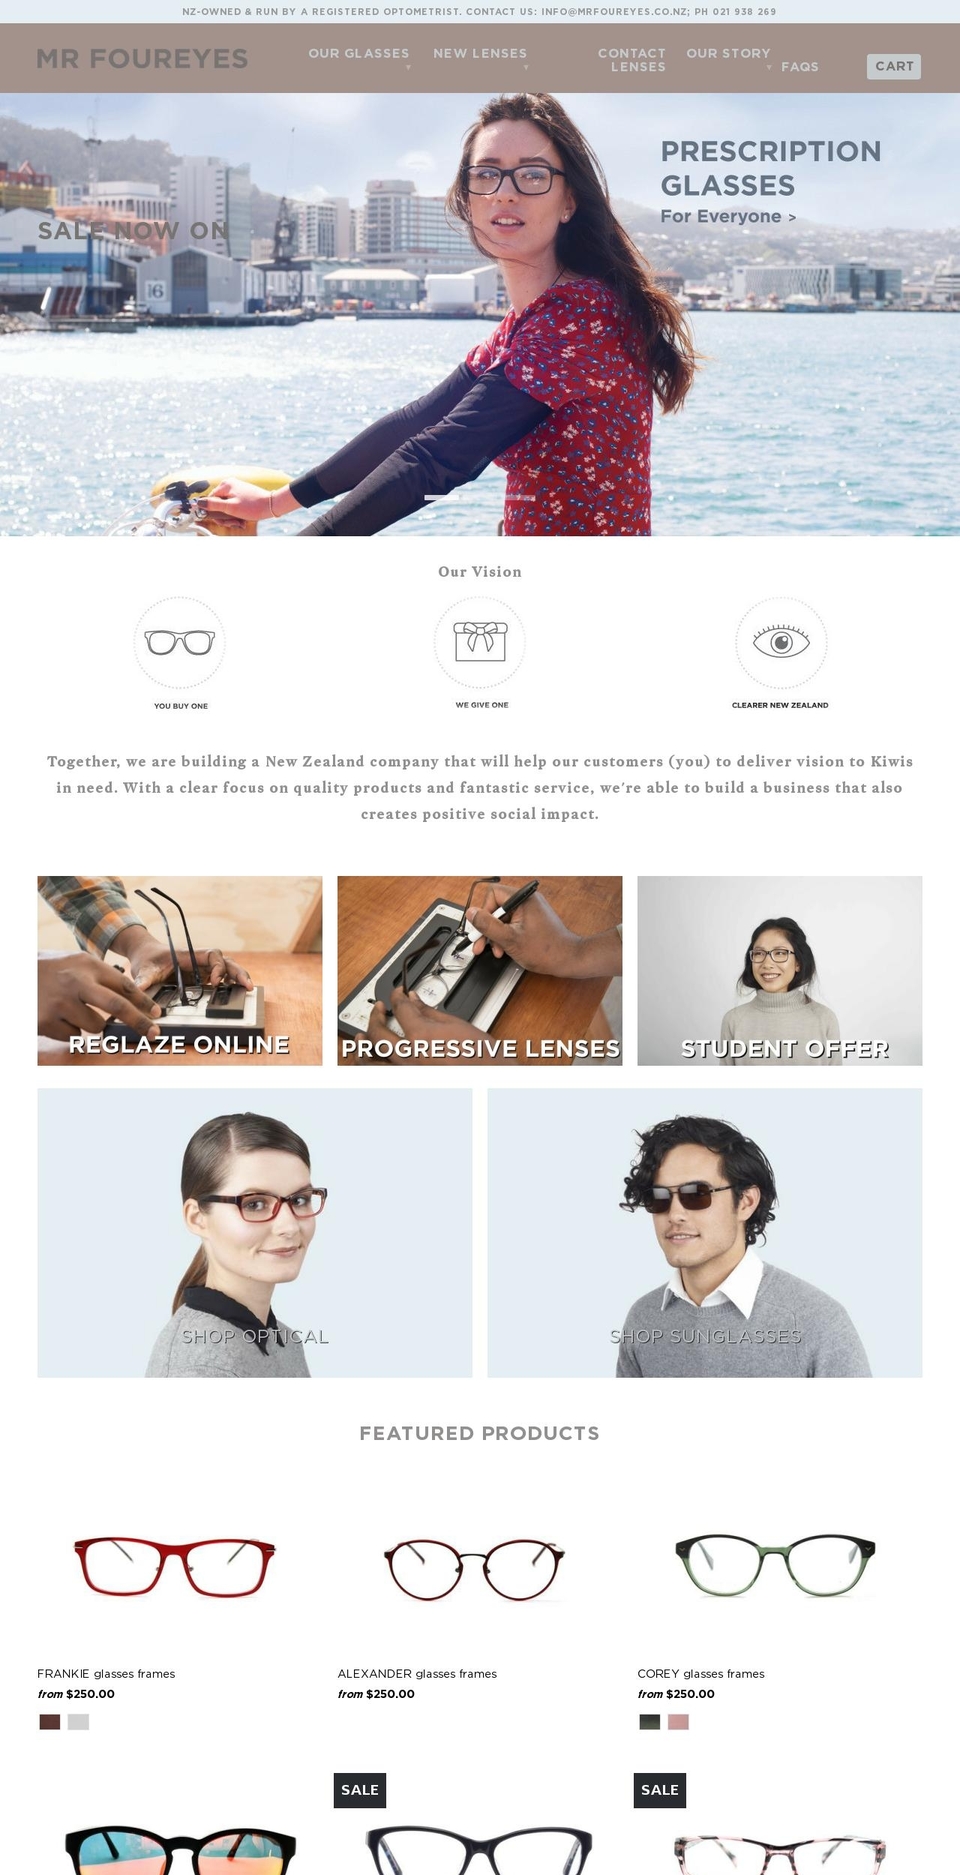 Story Shopify theme site example mrfoureyes.co.nz